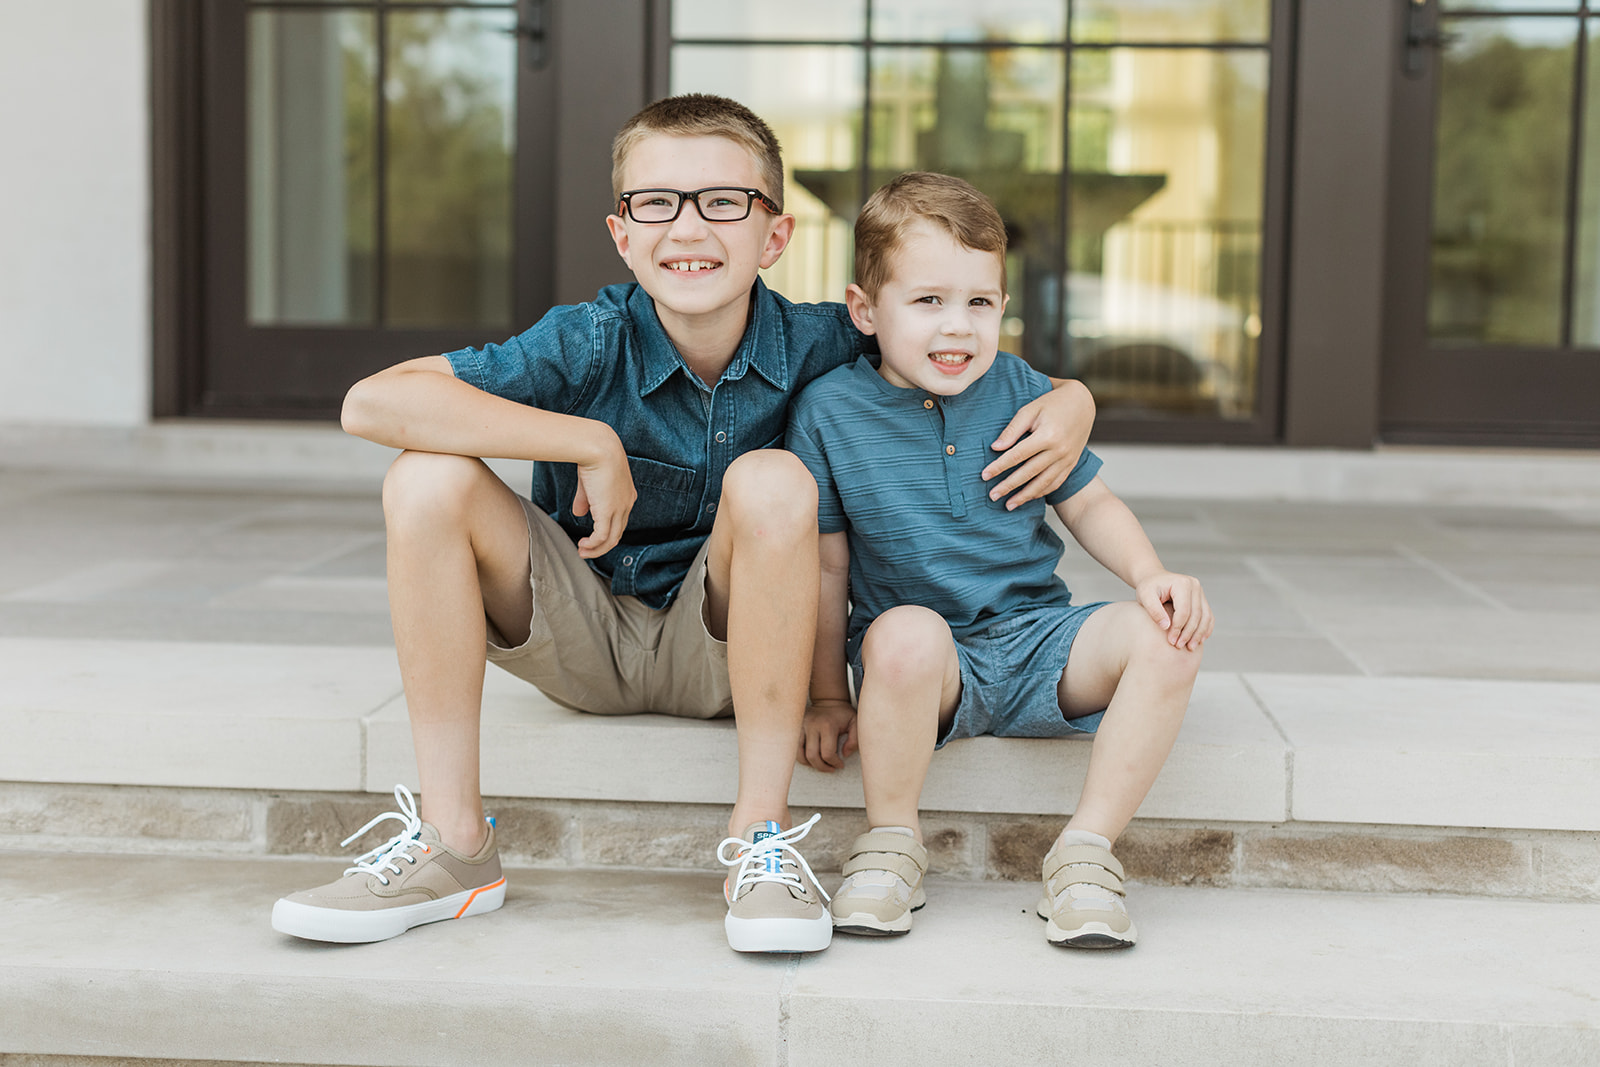 outdoor in-home family session in nashville tennessee. two brothers